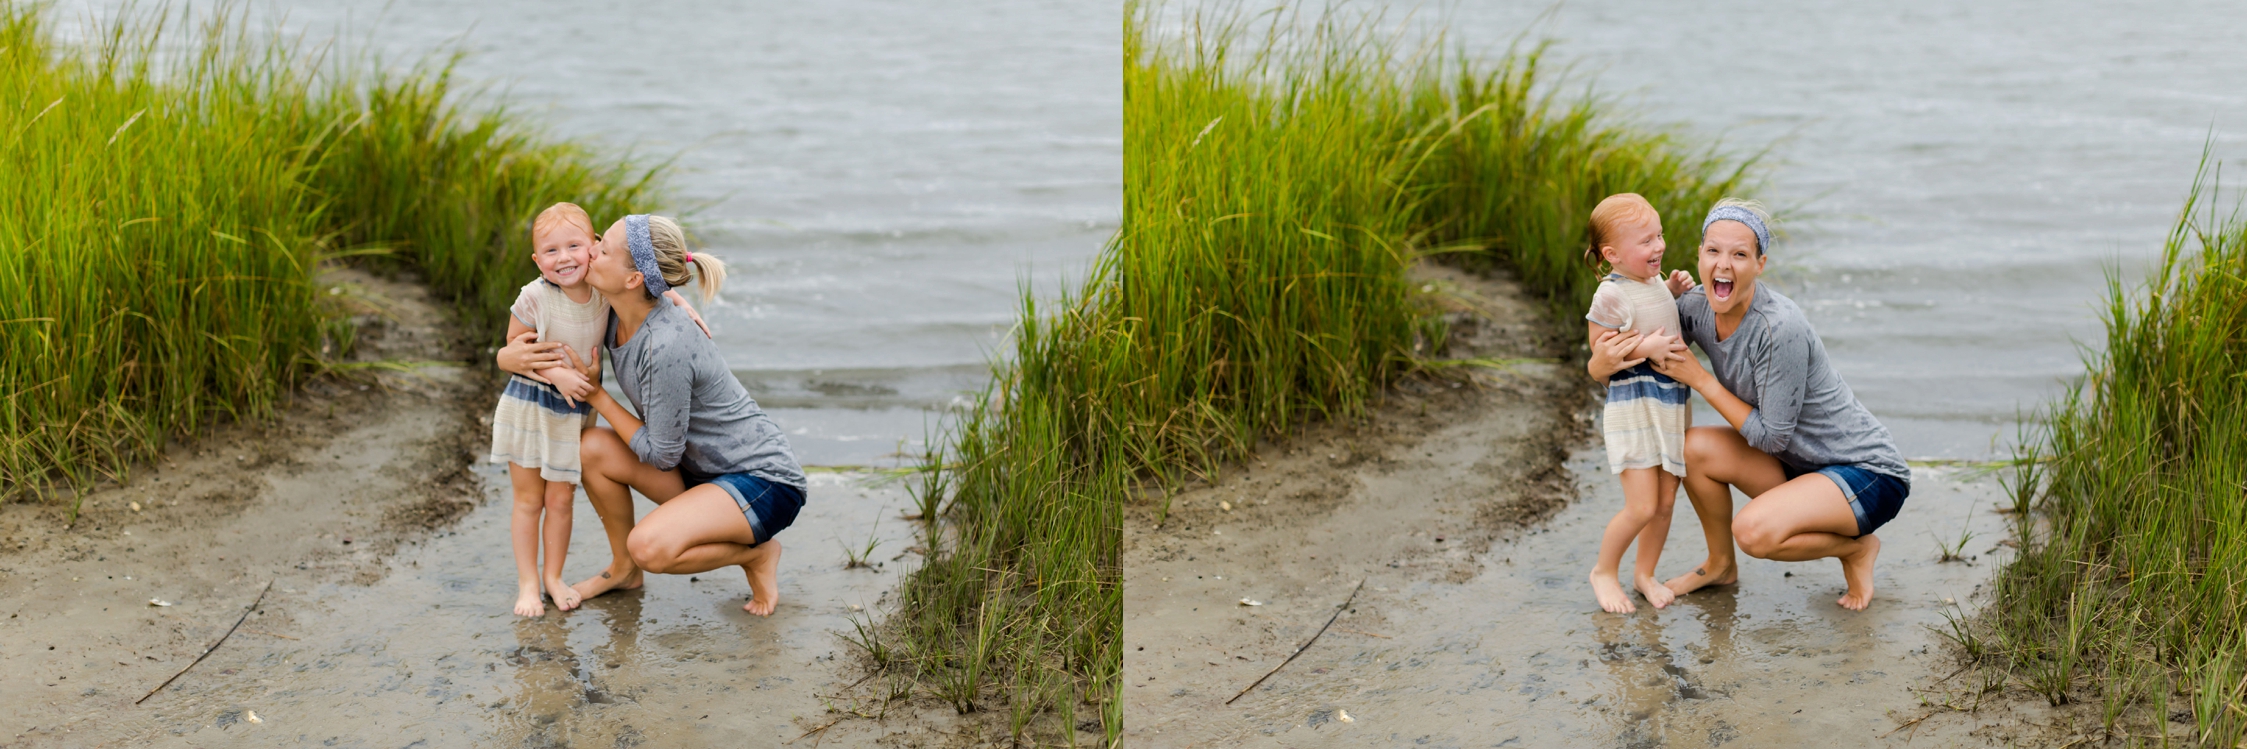 Outdoor Family Photography by Brooke Tucker Photography